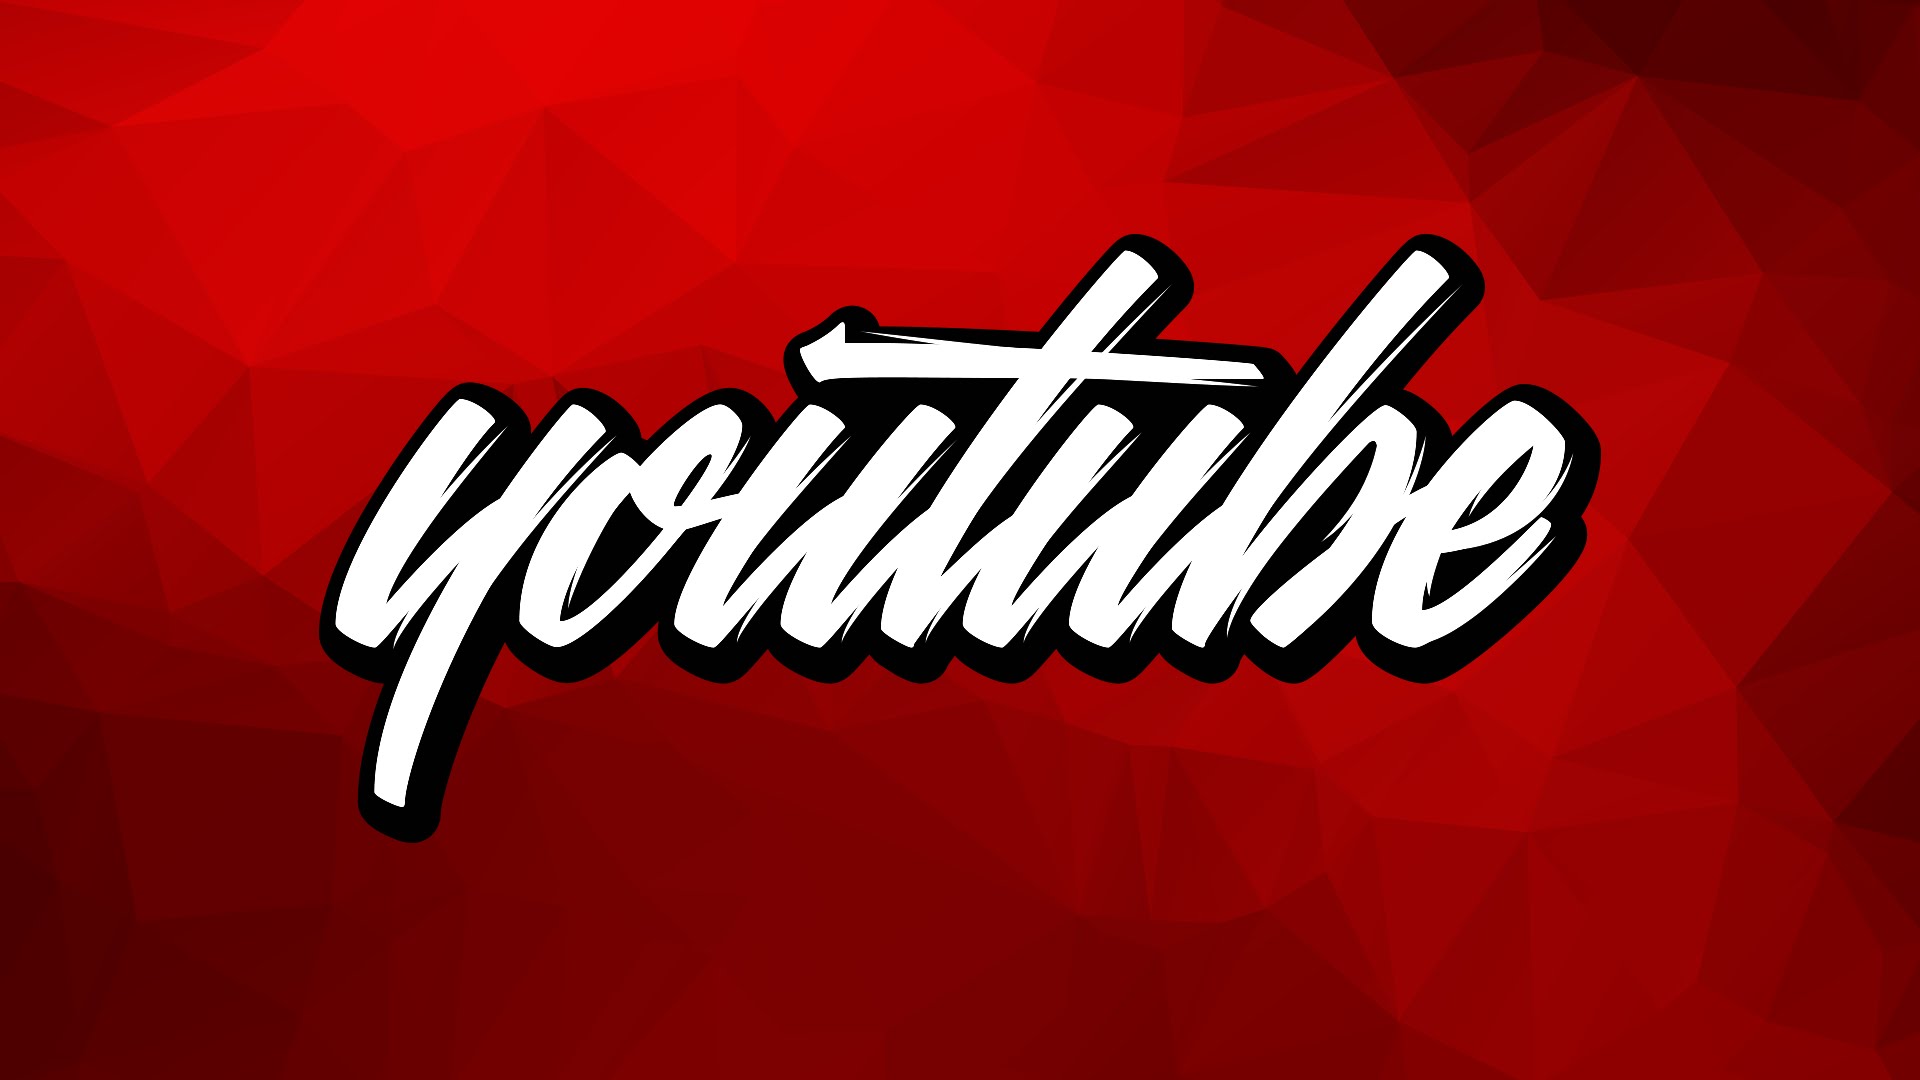 Youtube Background Wallpaper - Cool Youtube Backgrounds - HD Wallpaper 